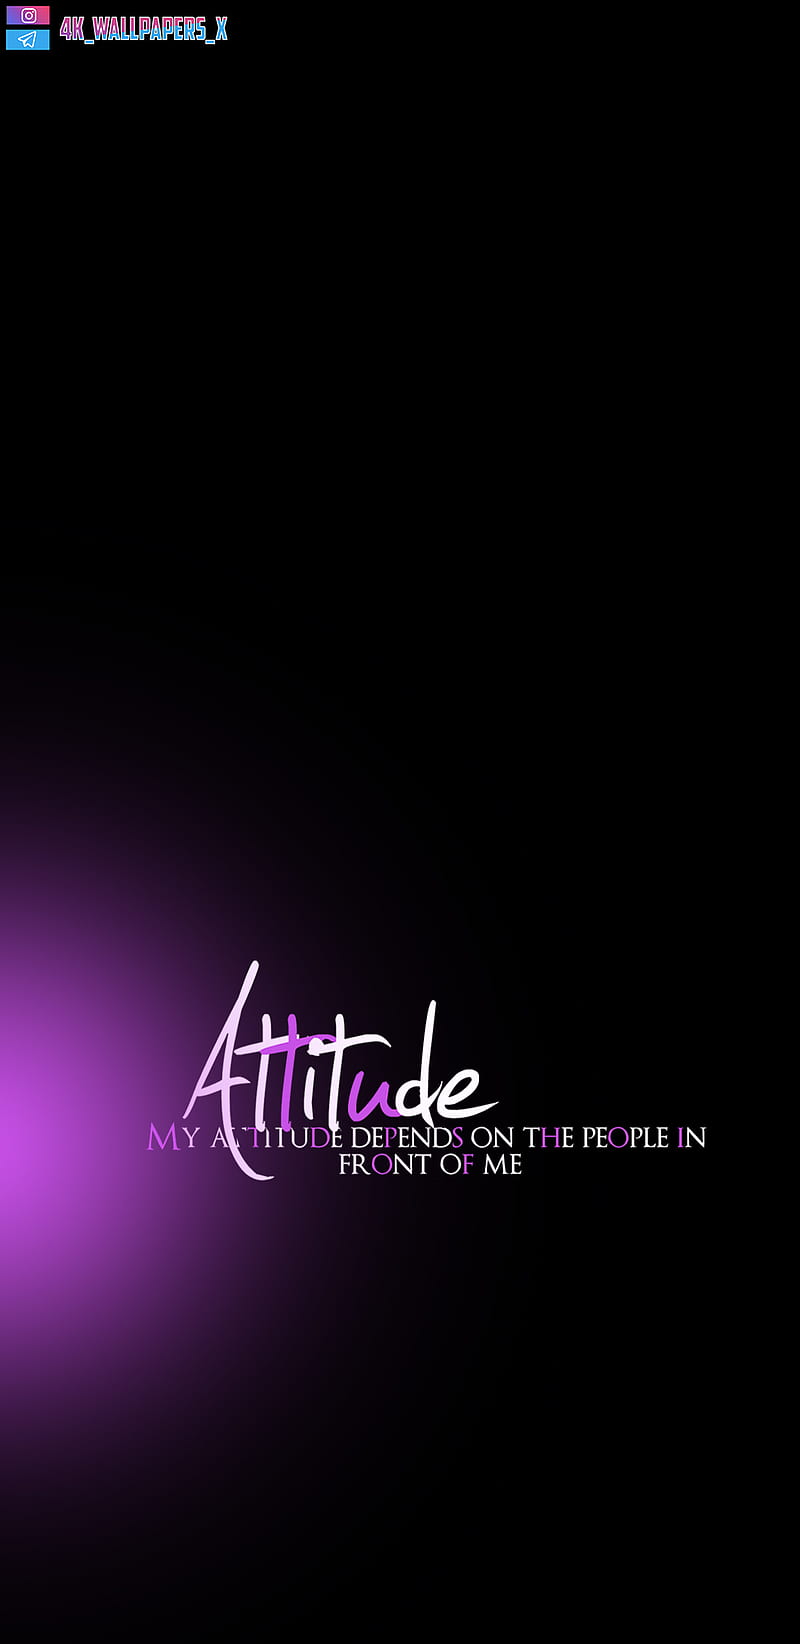 Attitude, army, badboy, bike, gold, hate, indian, love, time, violet, HD  phone wallpaper | Peakpx